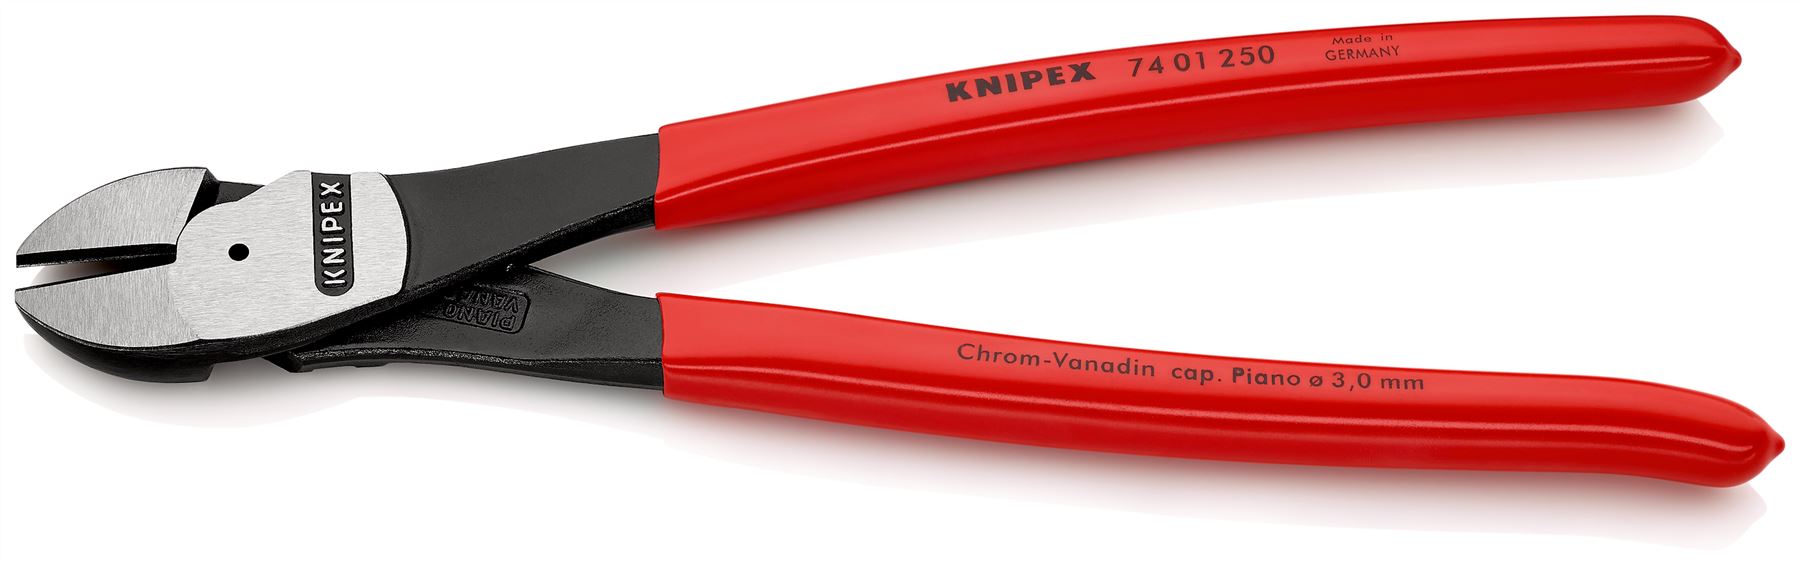 KNIPEX Diagonal Cutting Pliers High Leverage Side Cutters 250mm Plastic Coated Handles 74 01 250 SB